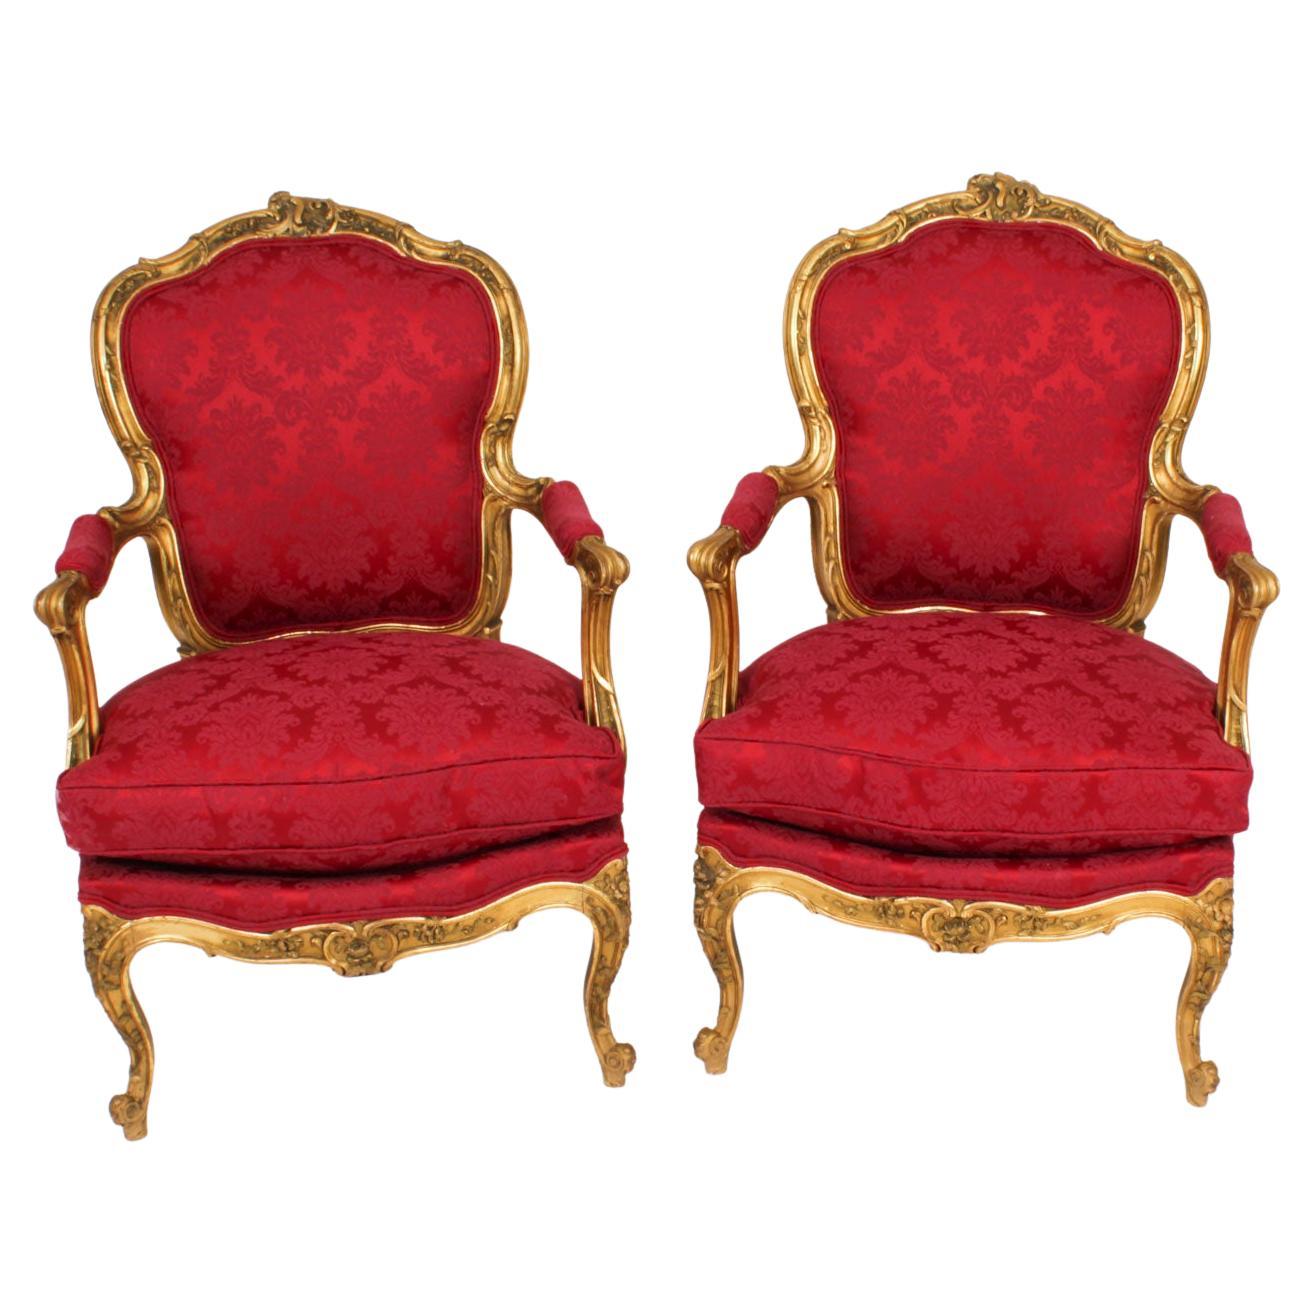 Antique Pair of Louis XV Revival Giltwood Armchairs 19 Century For Sale